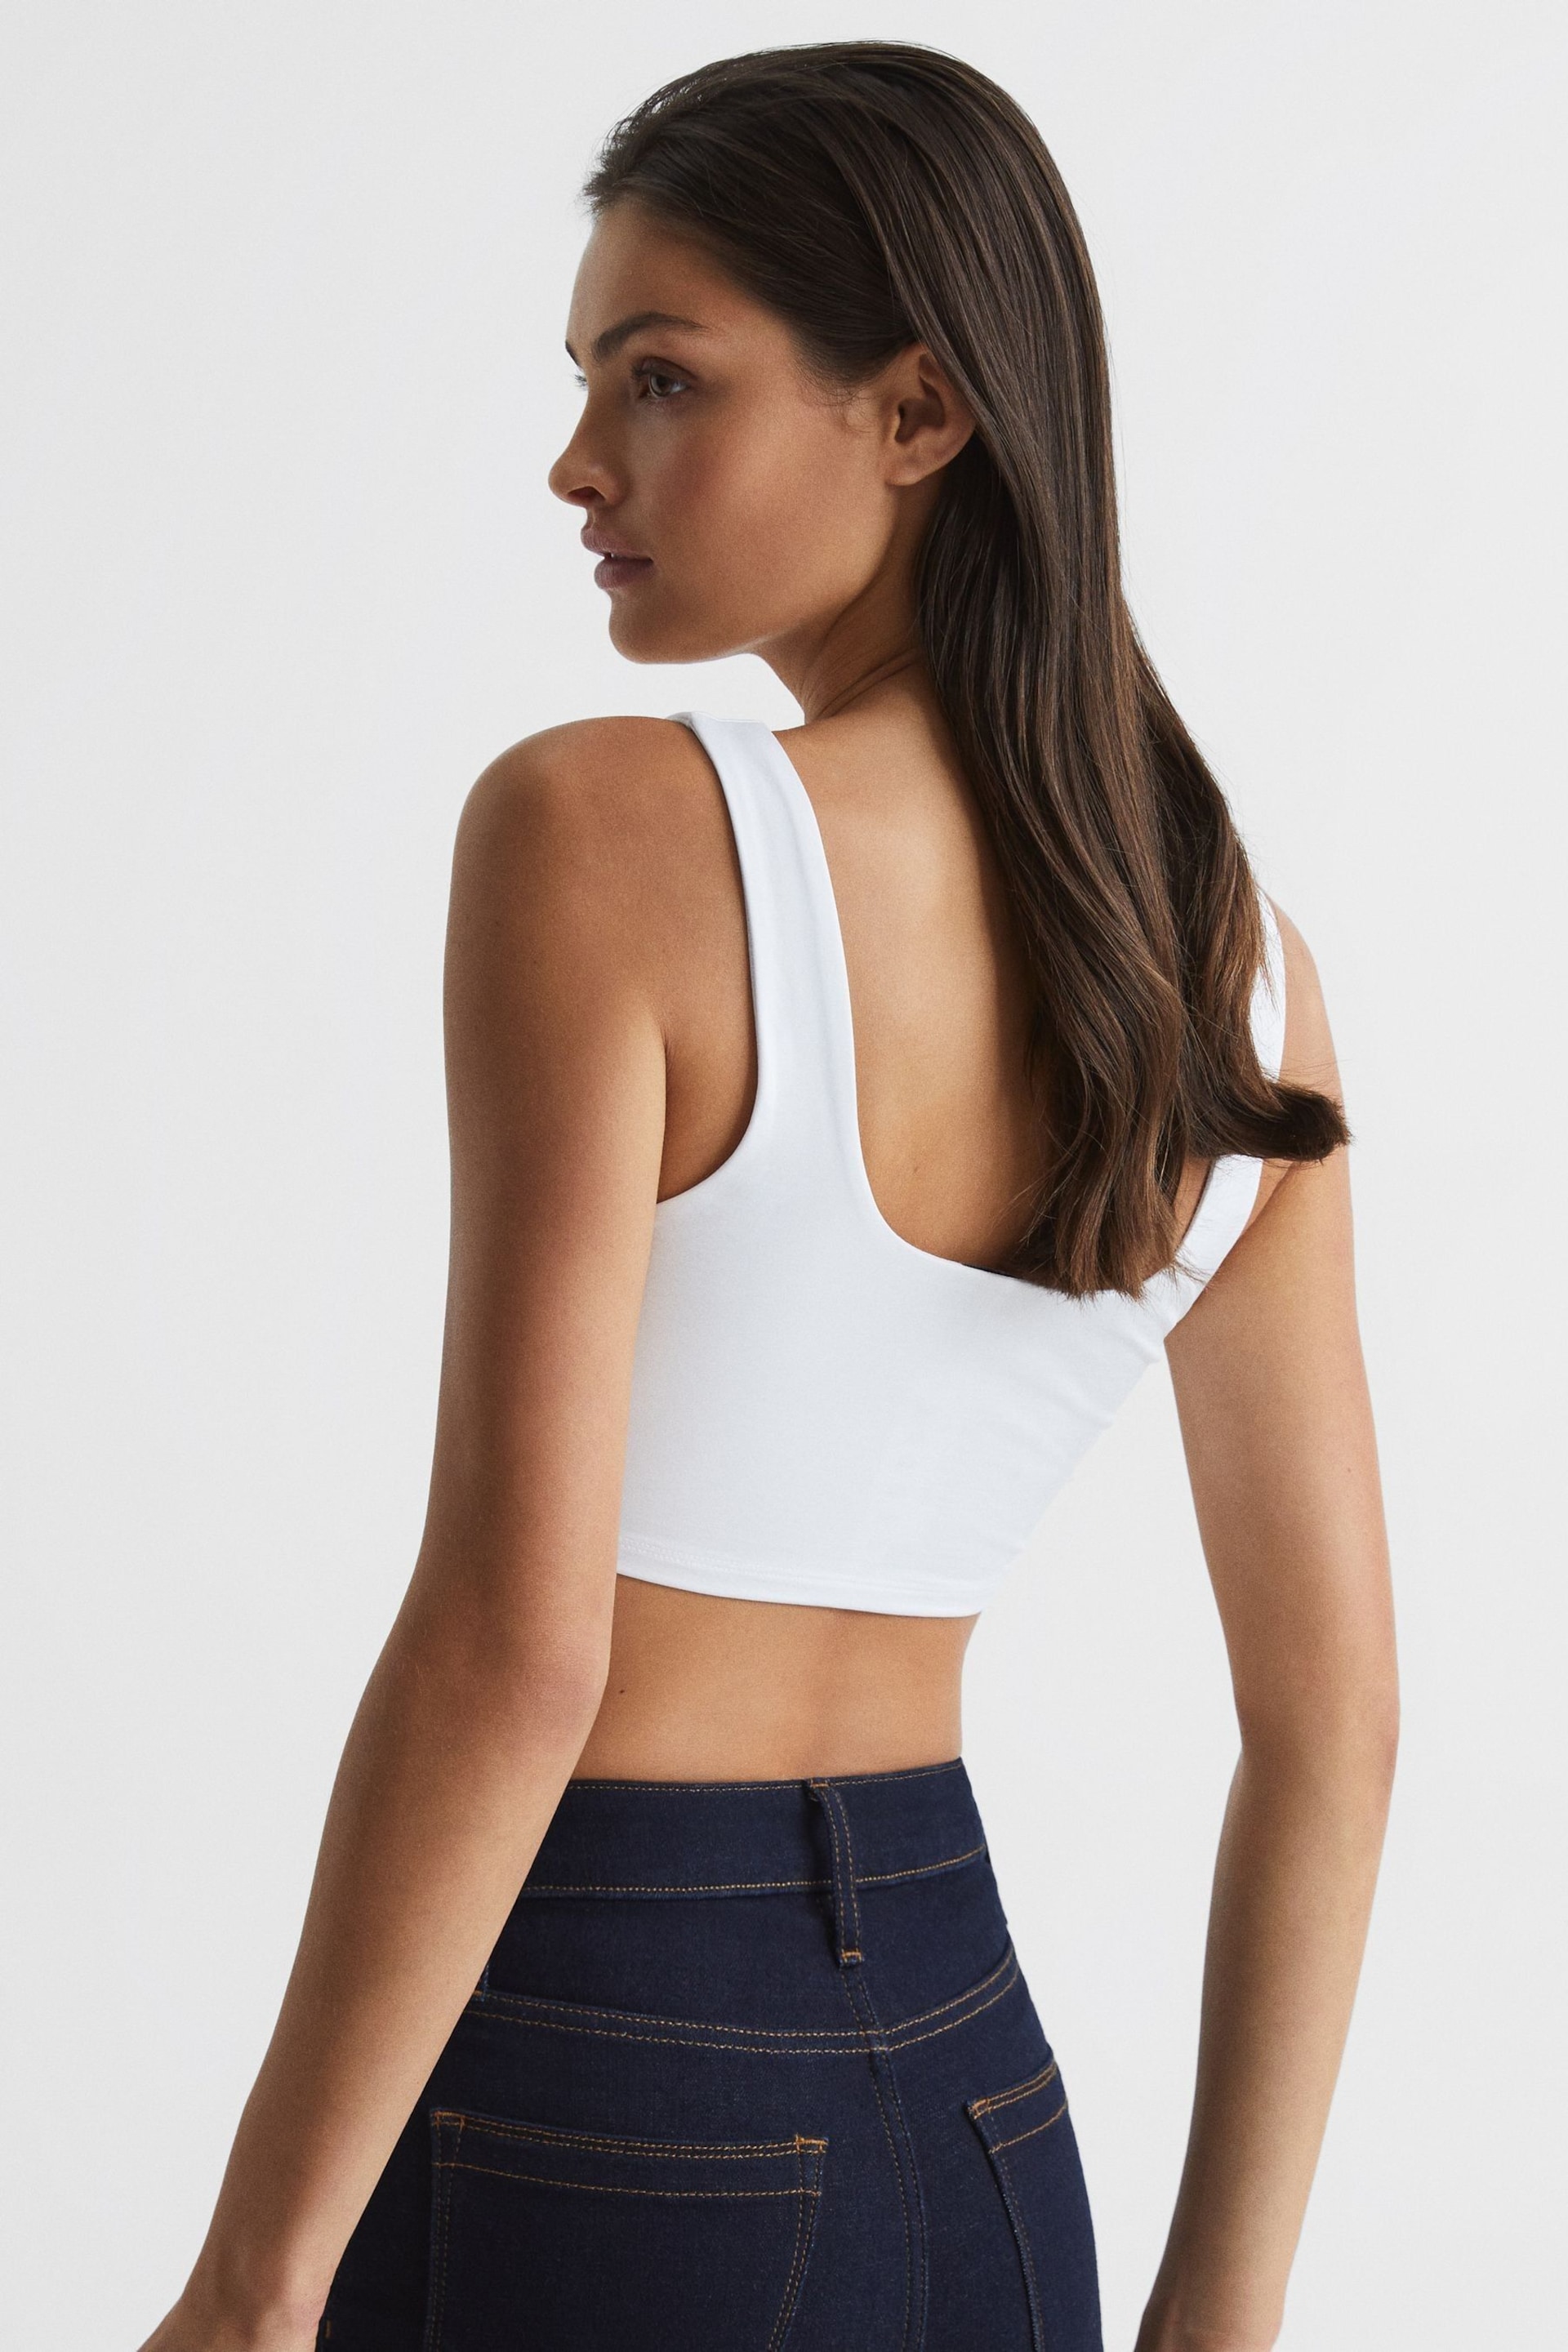 Reiss White Fae Square Neck Crop Top - Image 5 of 7